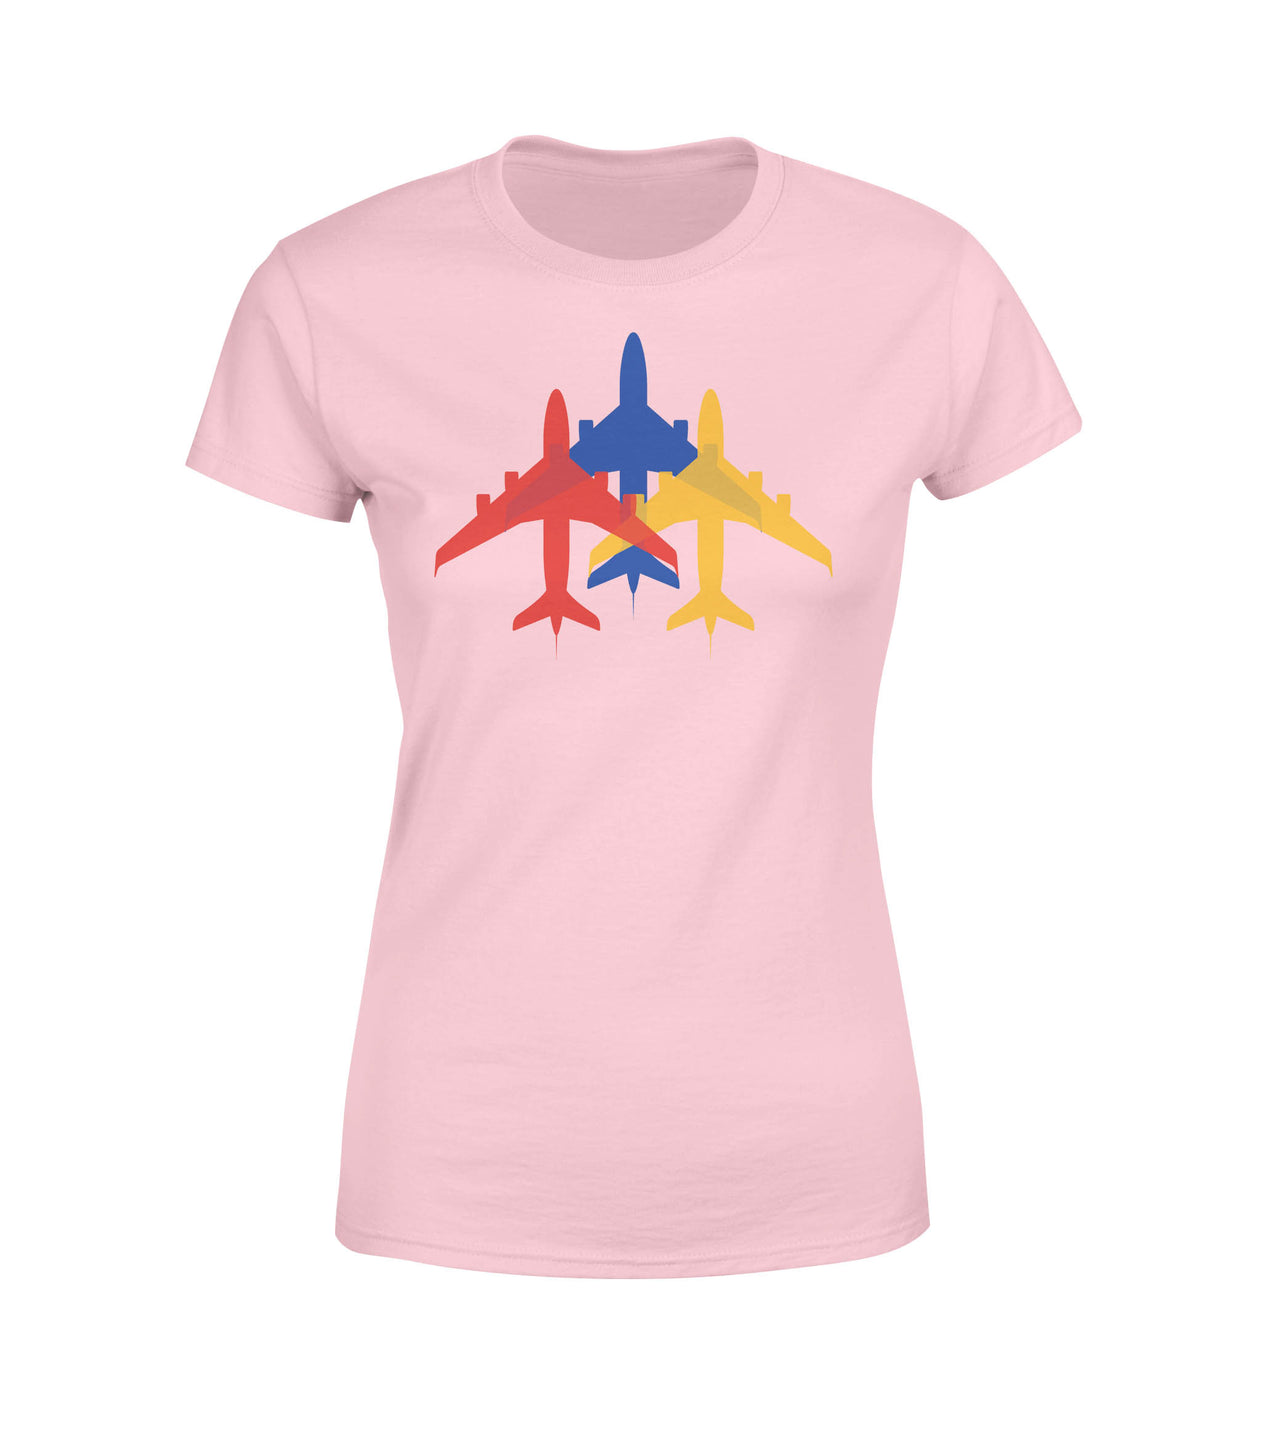 Colourful 3 Airplanes Designed Women T-Shirts